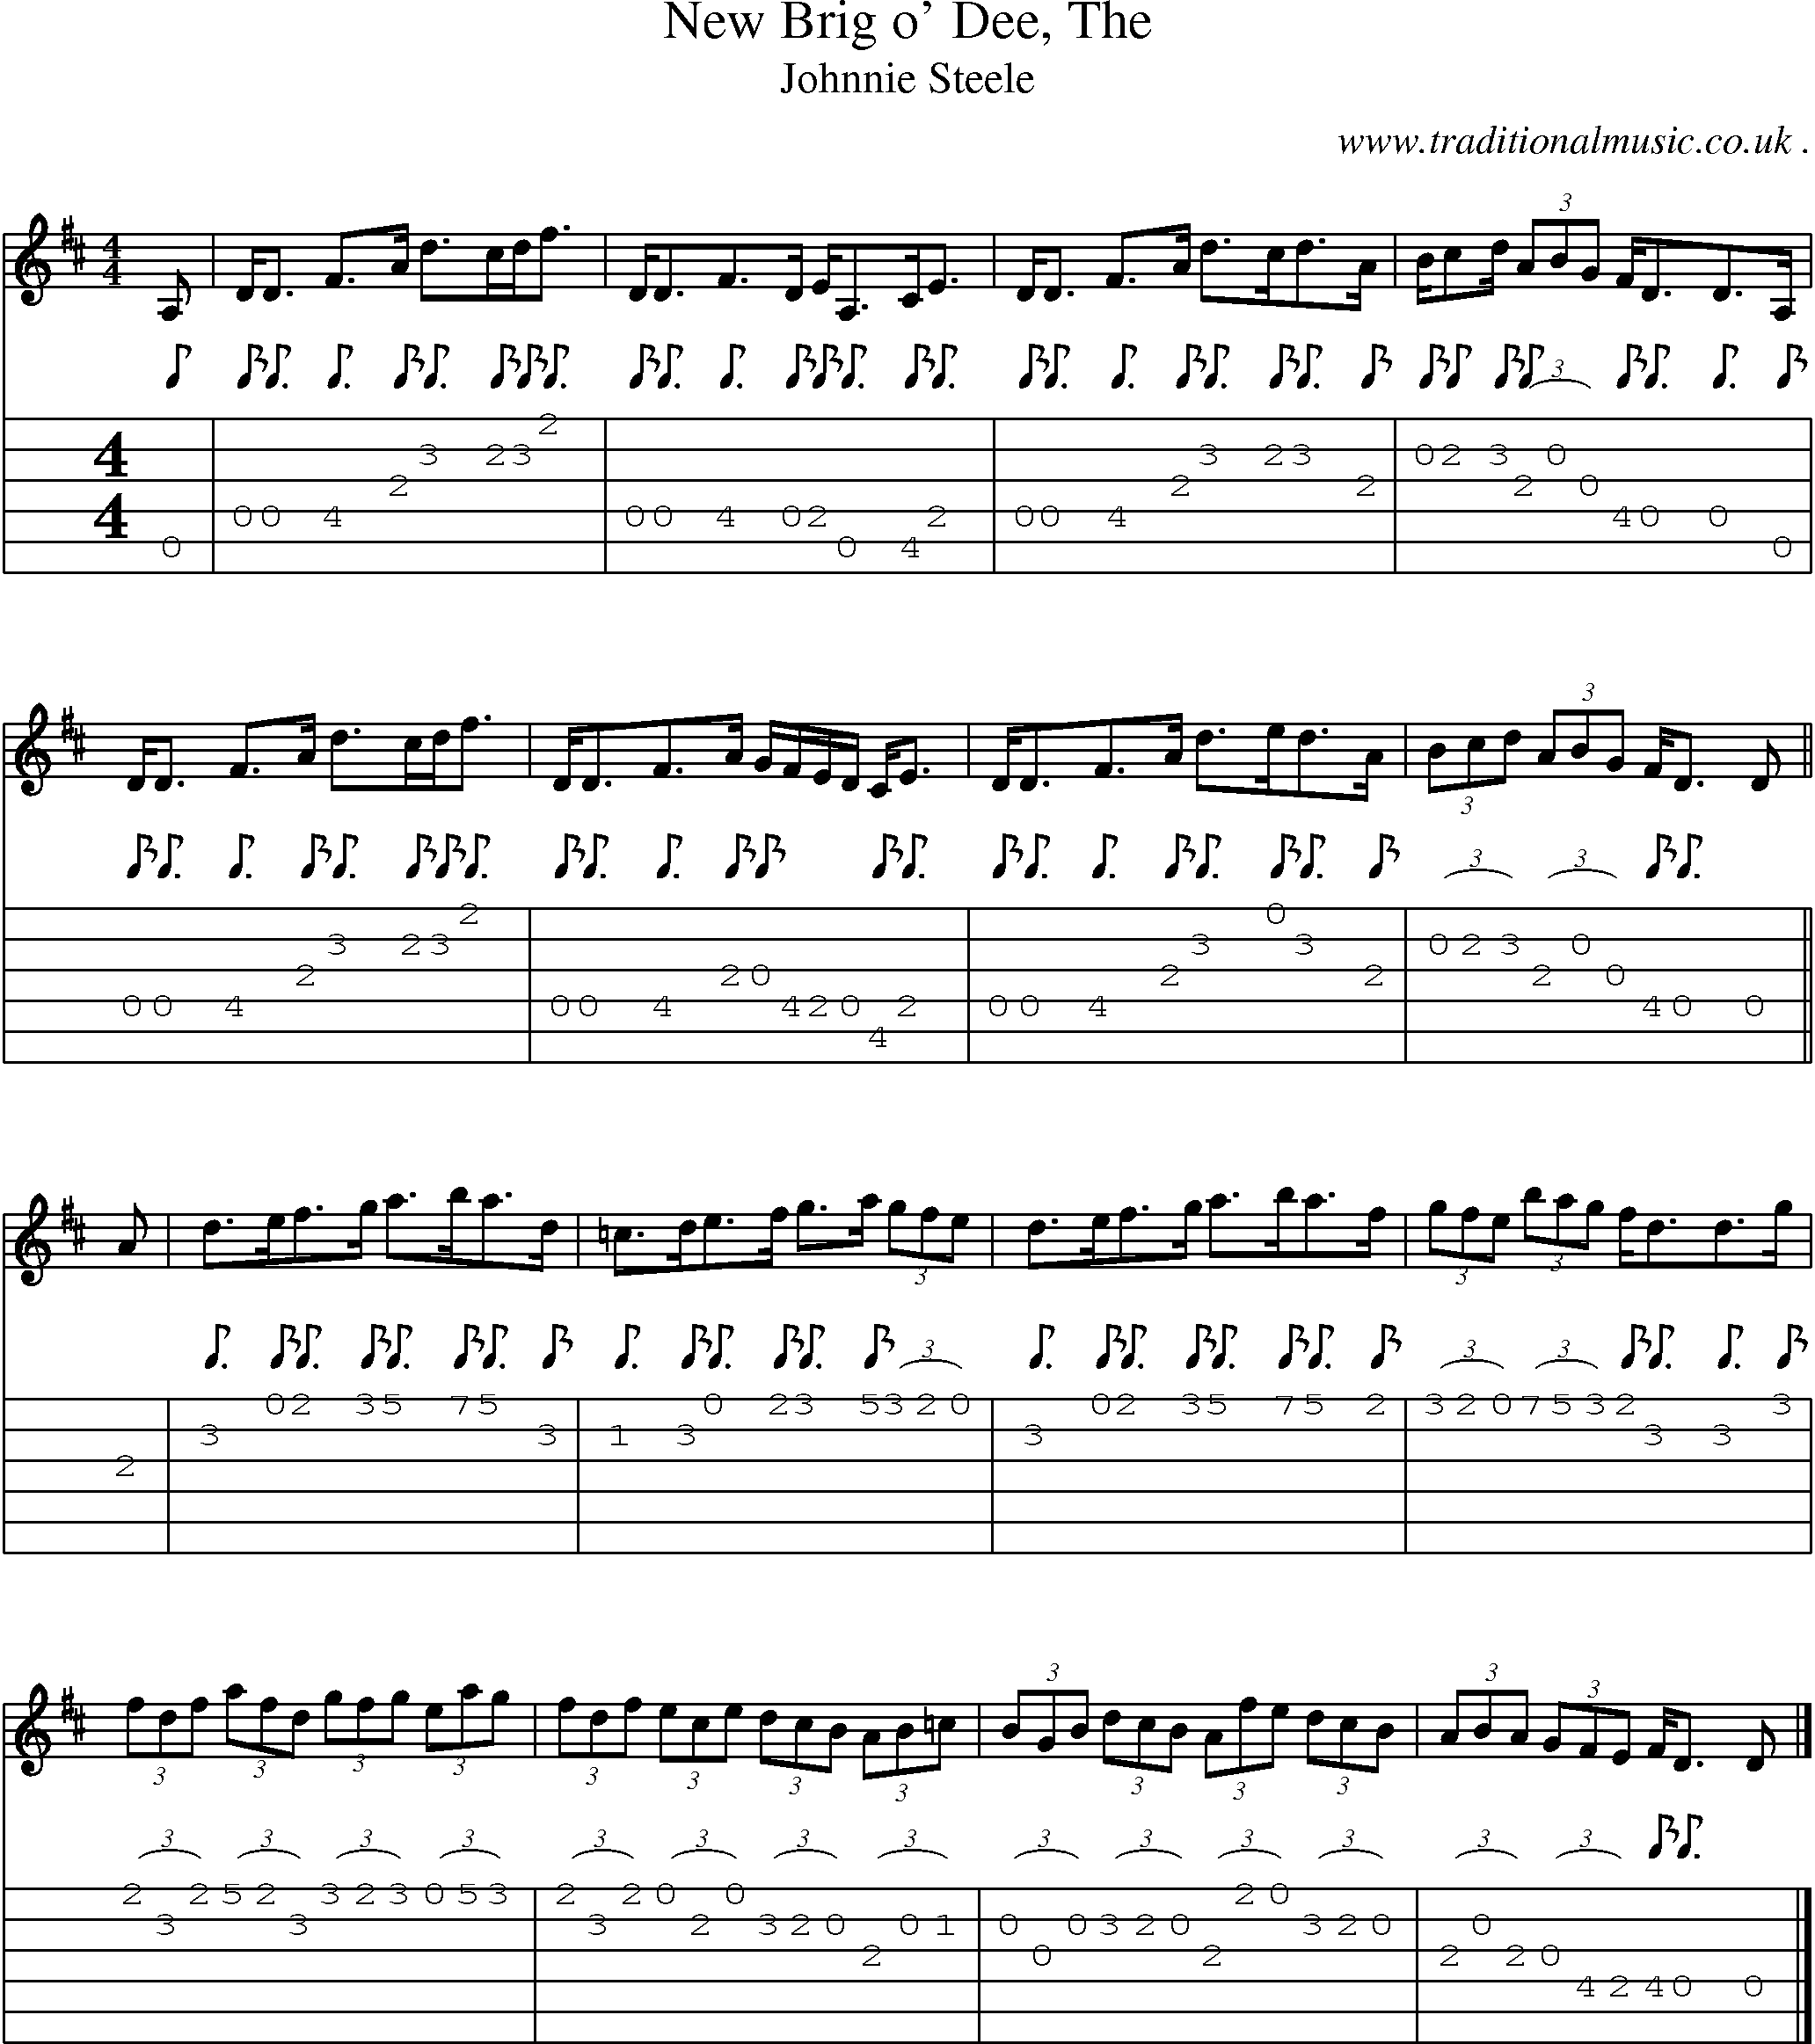 Sheet-music  score, Chords and Guitar Tabs for New Brig O Dee The